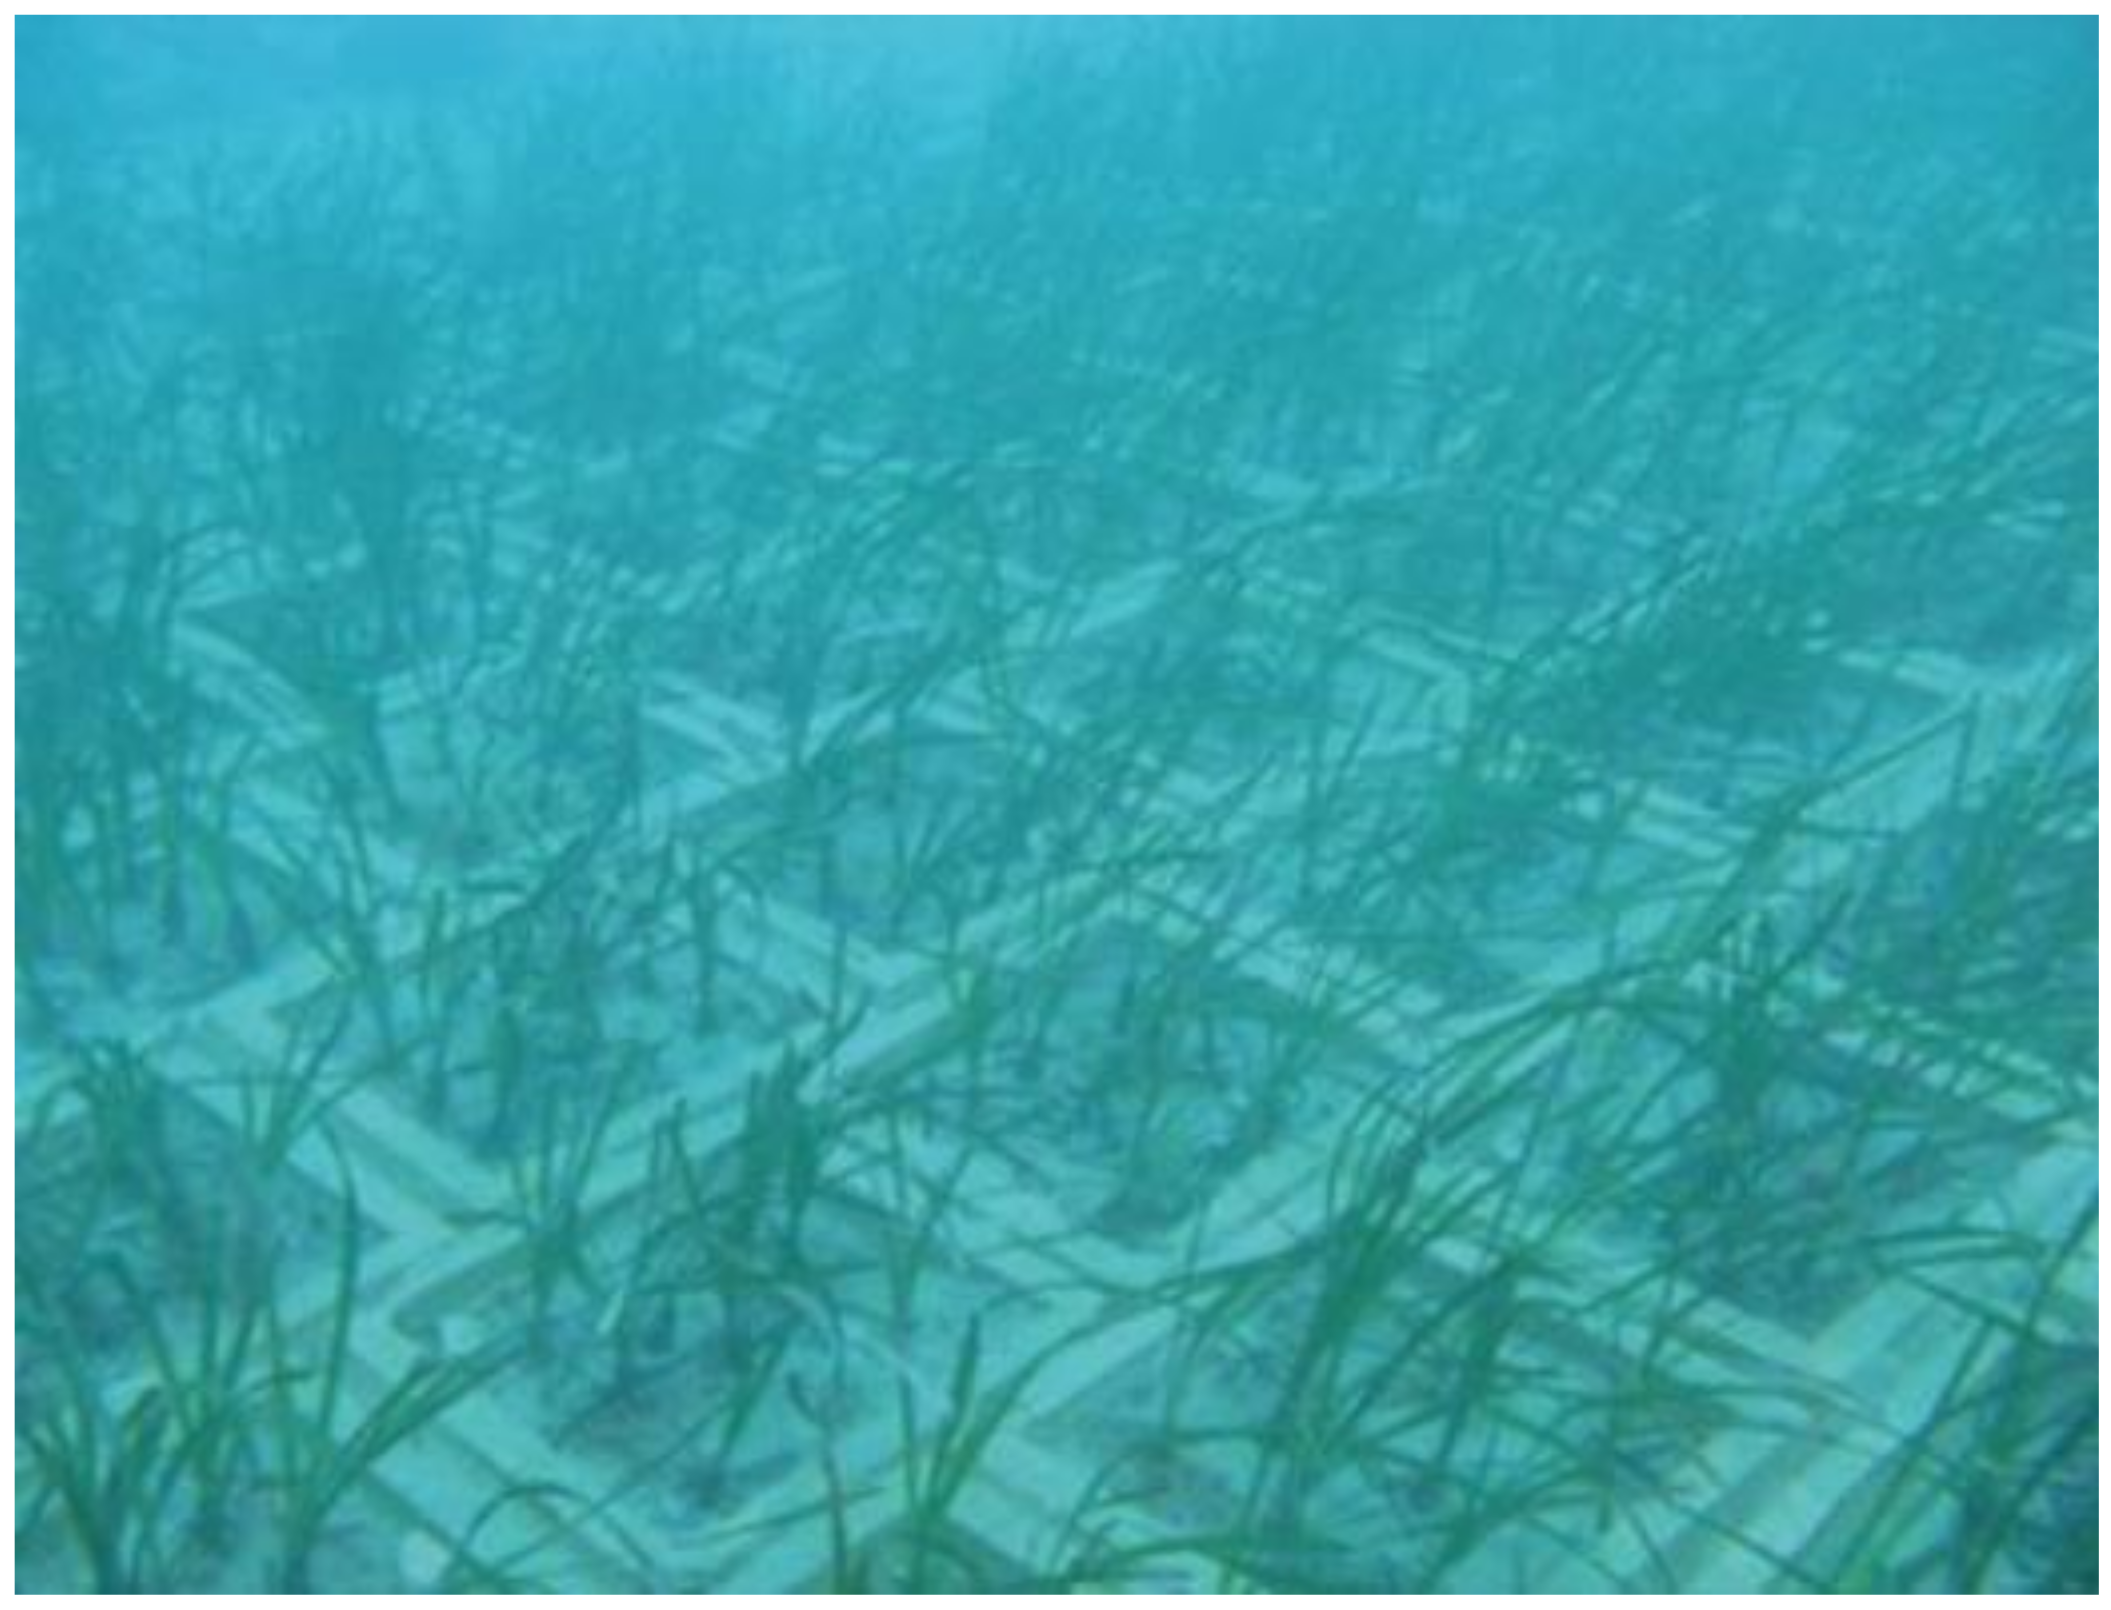 Water | Free Full-Text | Restoration of Seagrass Meadows in the  Mediterranean Sea: A Critical Review of Effectiveness and Ethical Issues |  HTML